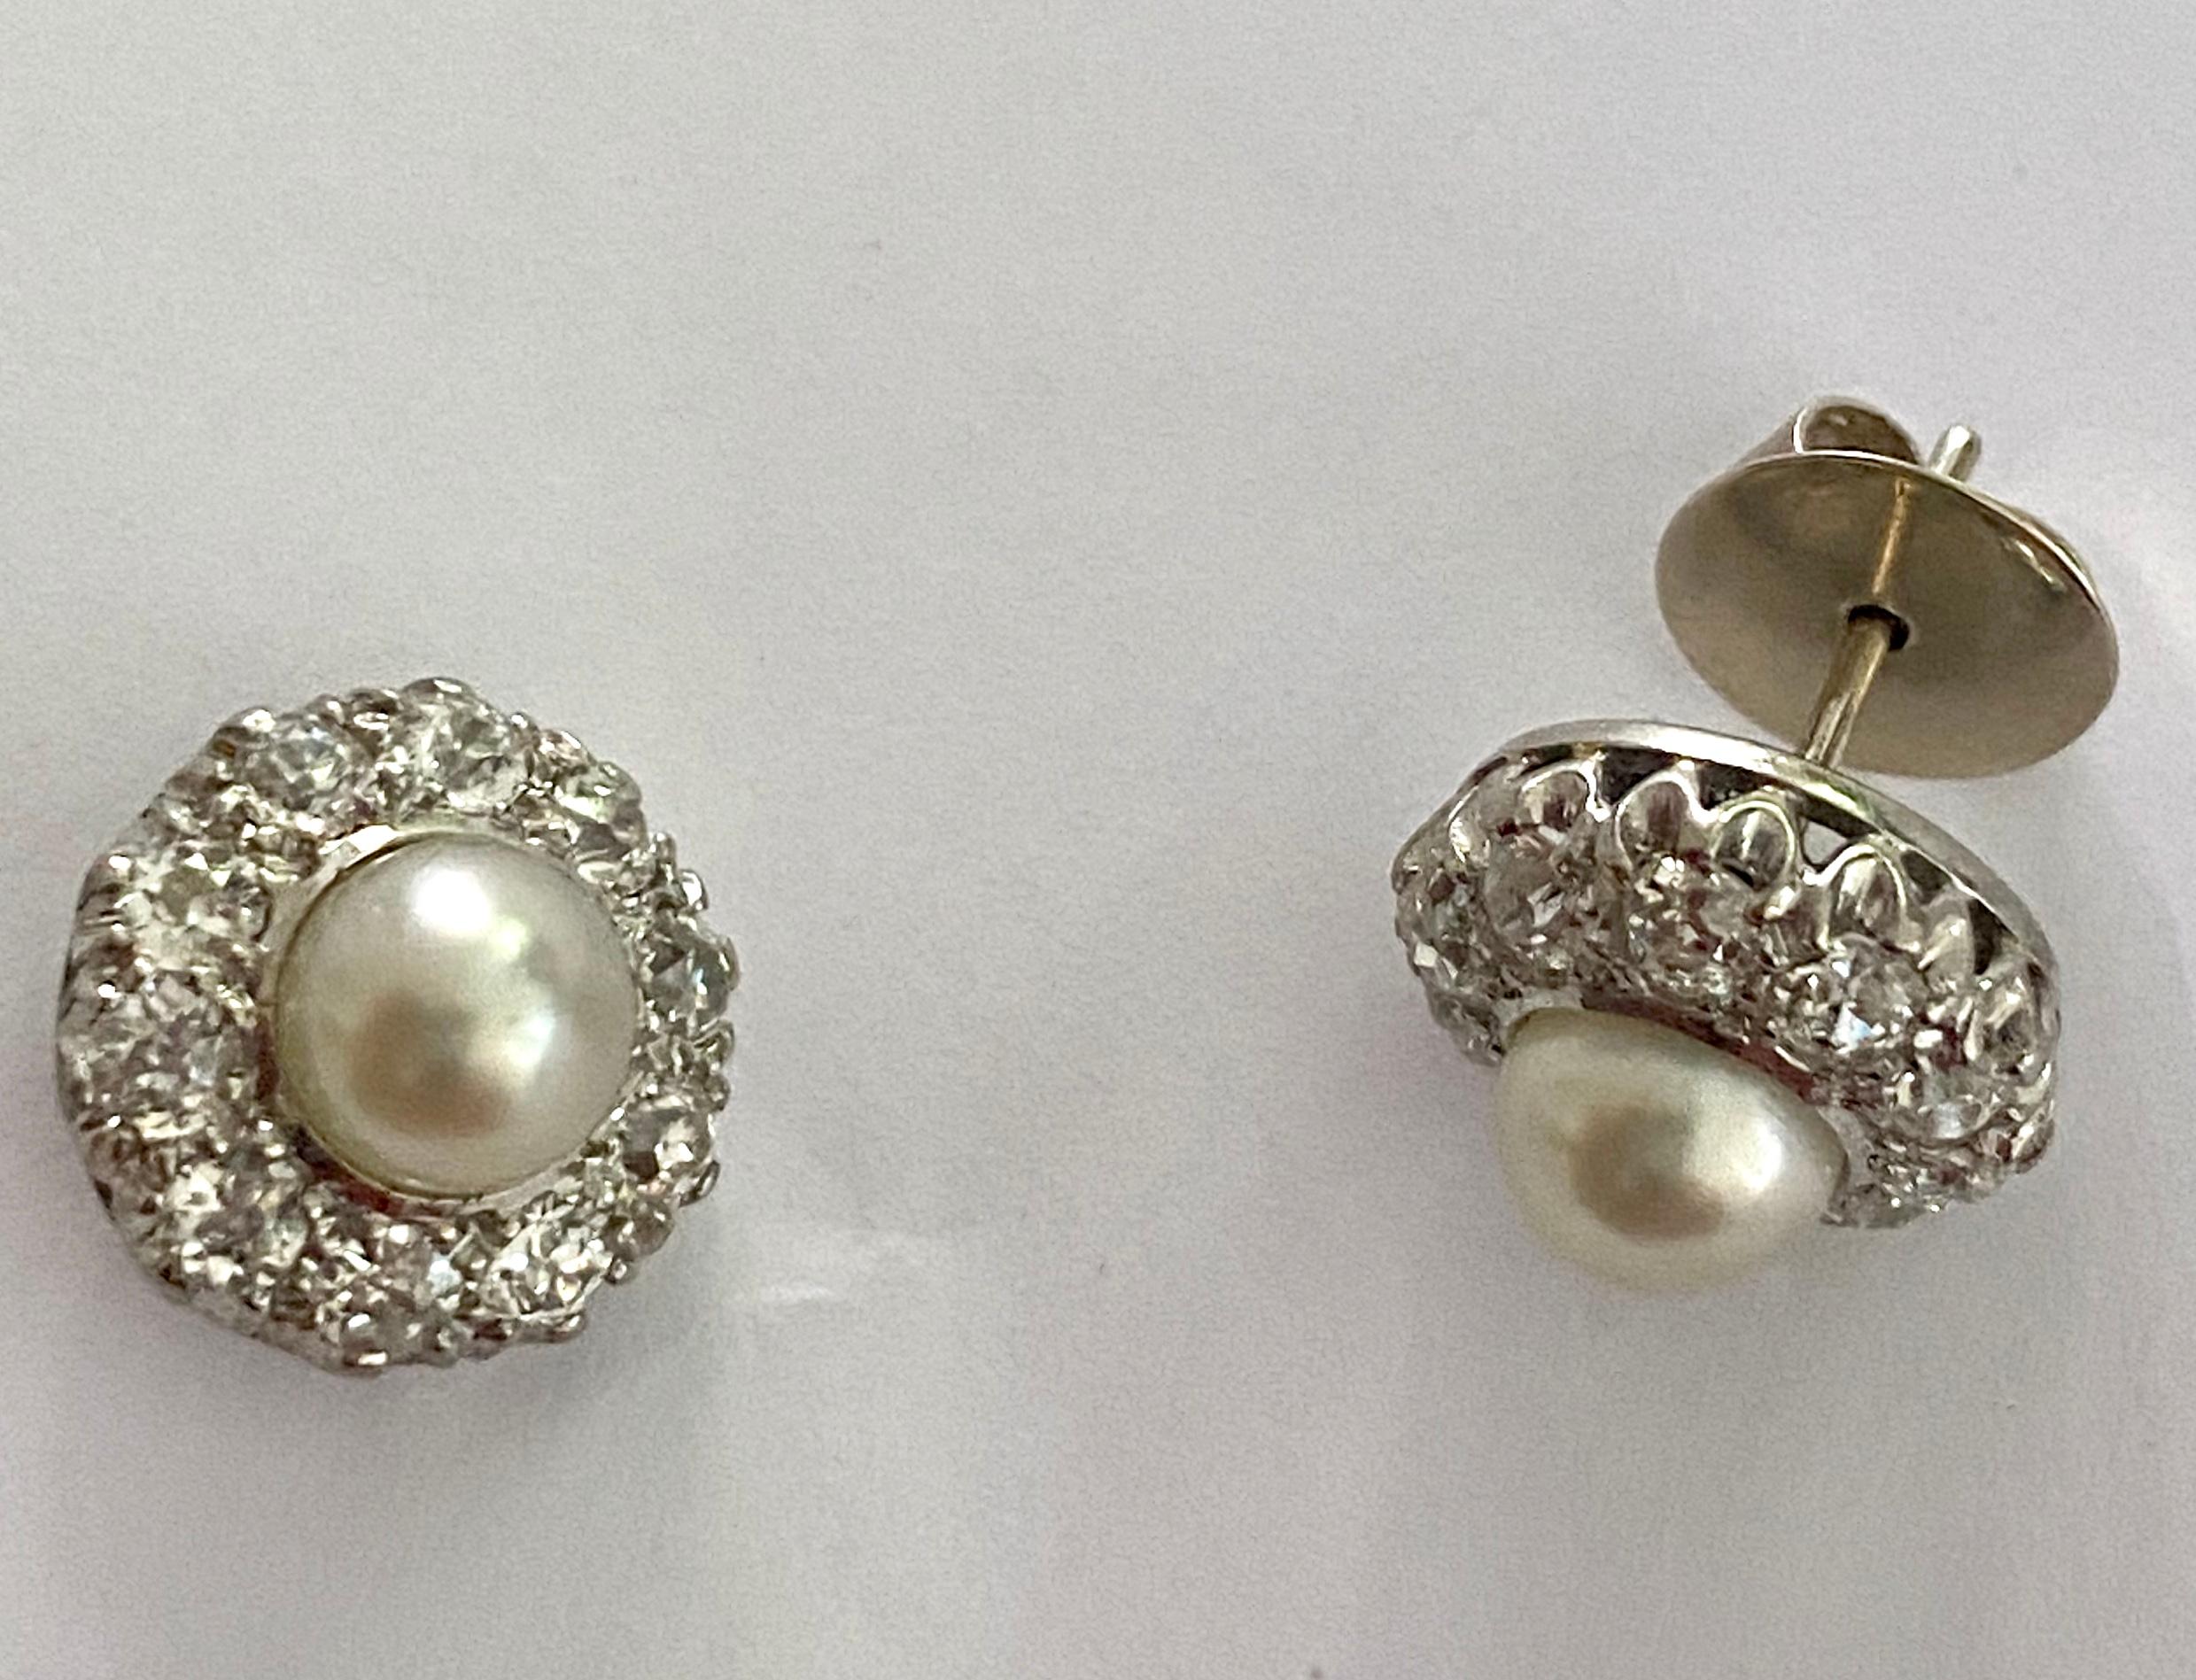 Edwardian One '1' Pair of 14 Karat White Gold Ear Rings, Round Cult Pearls and 20 Diamonds